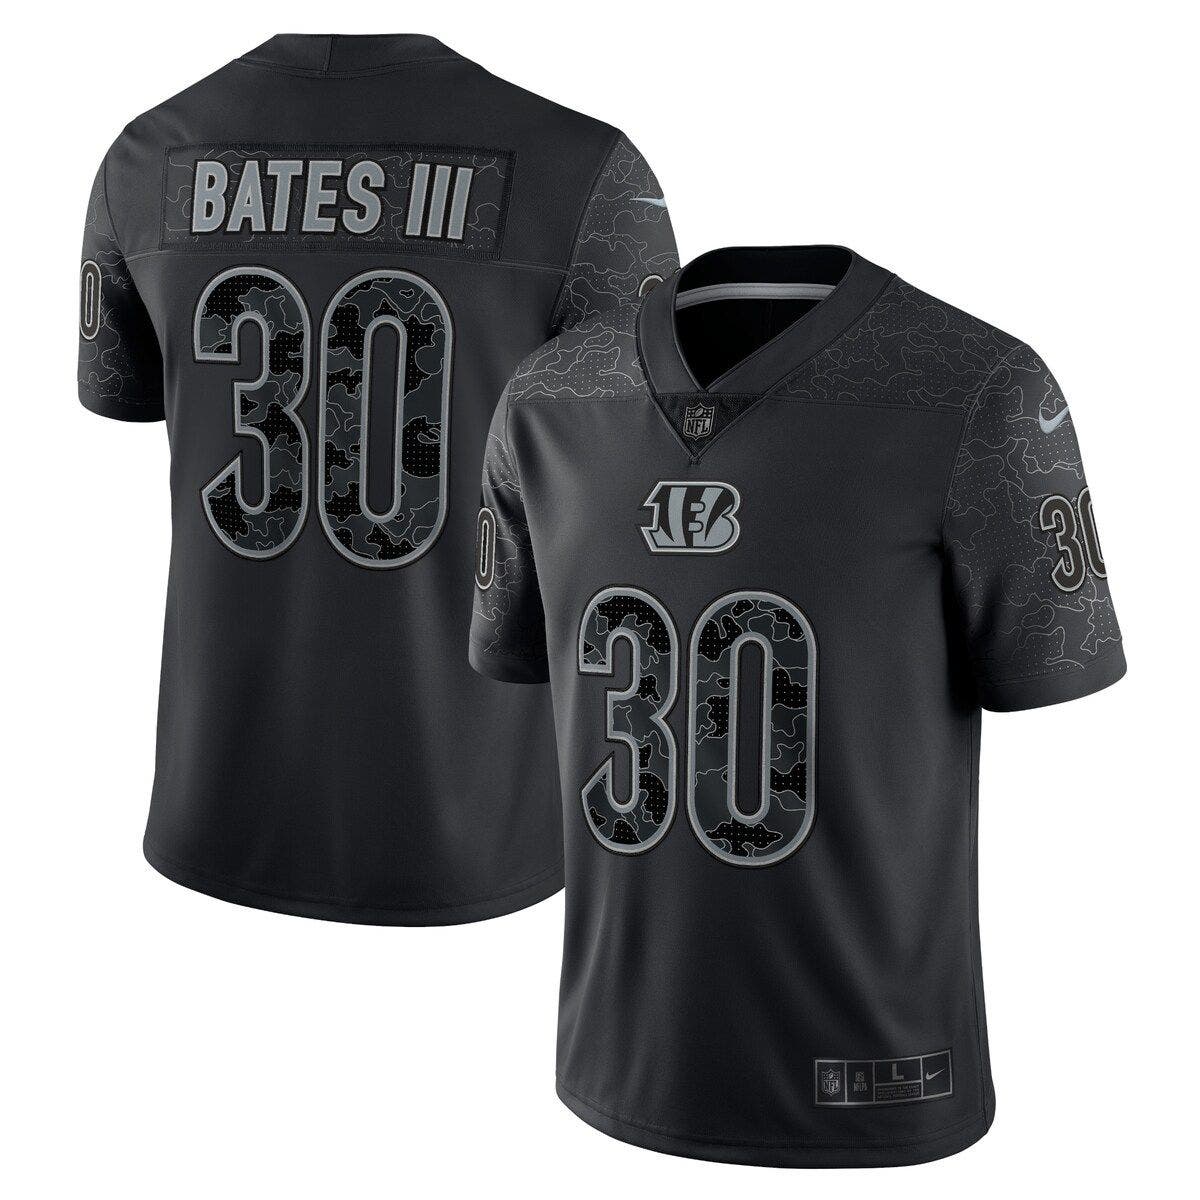 Ted Bates nfl jersey